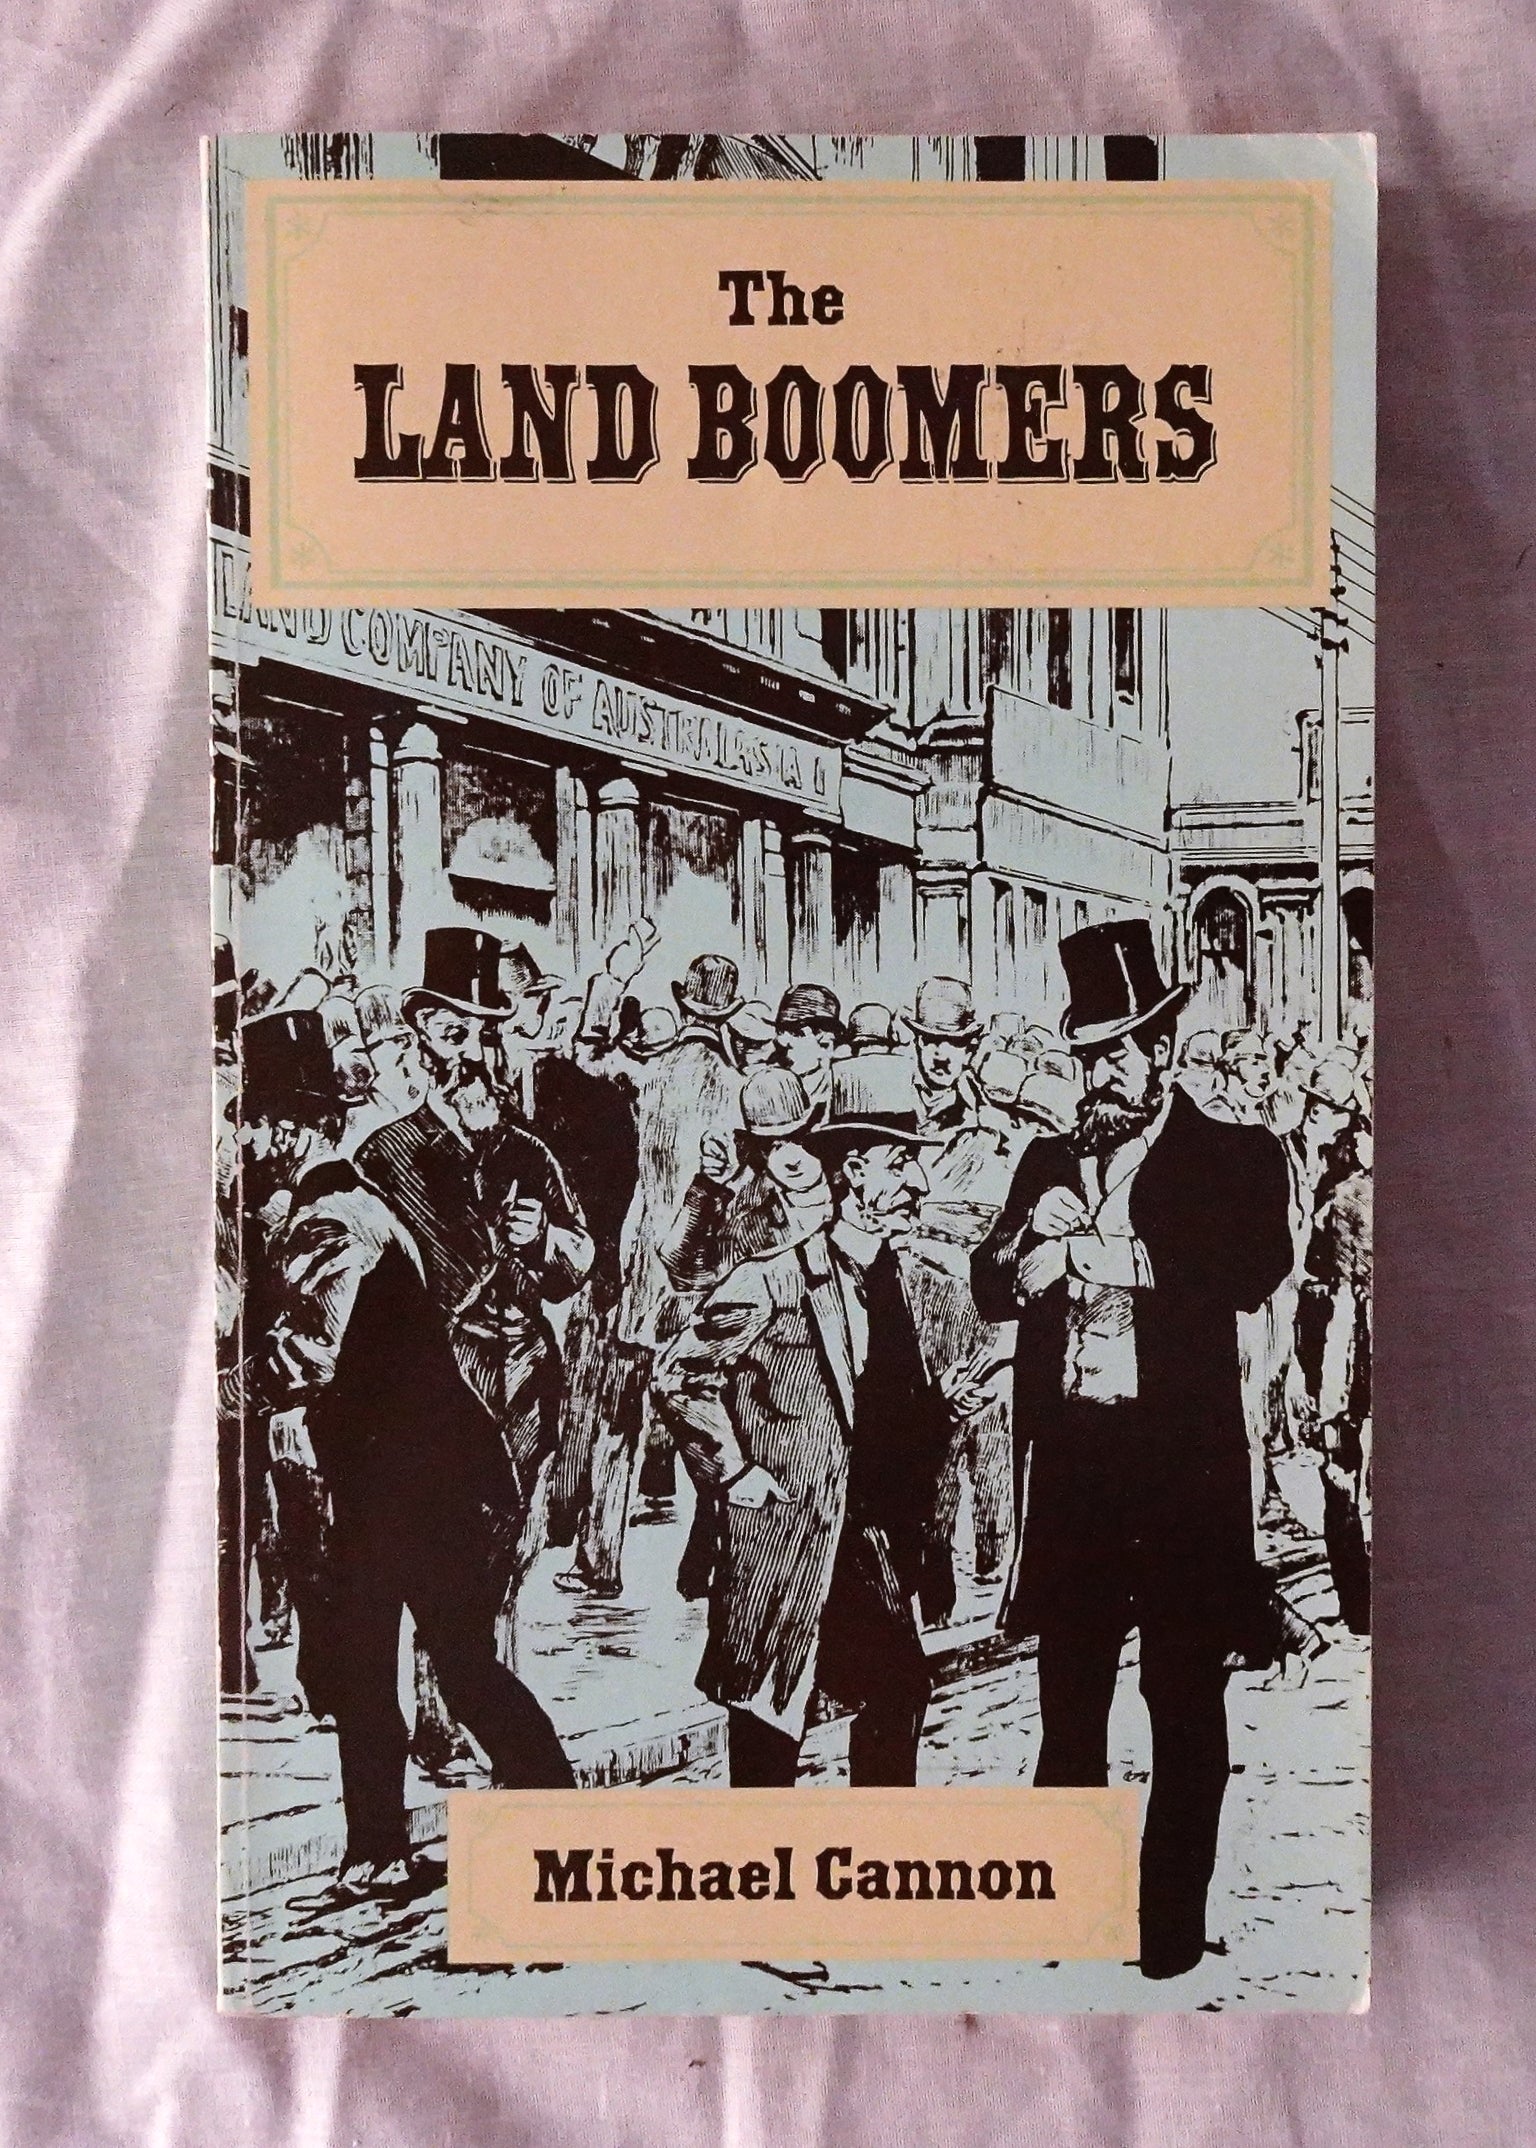 The Land Boomers by Michael Cannon